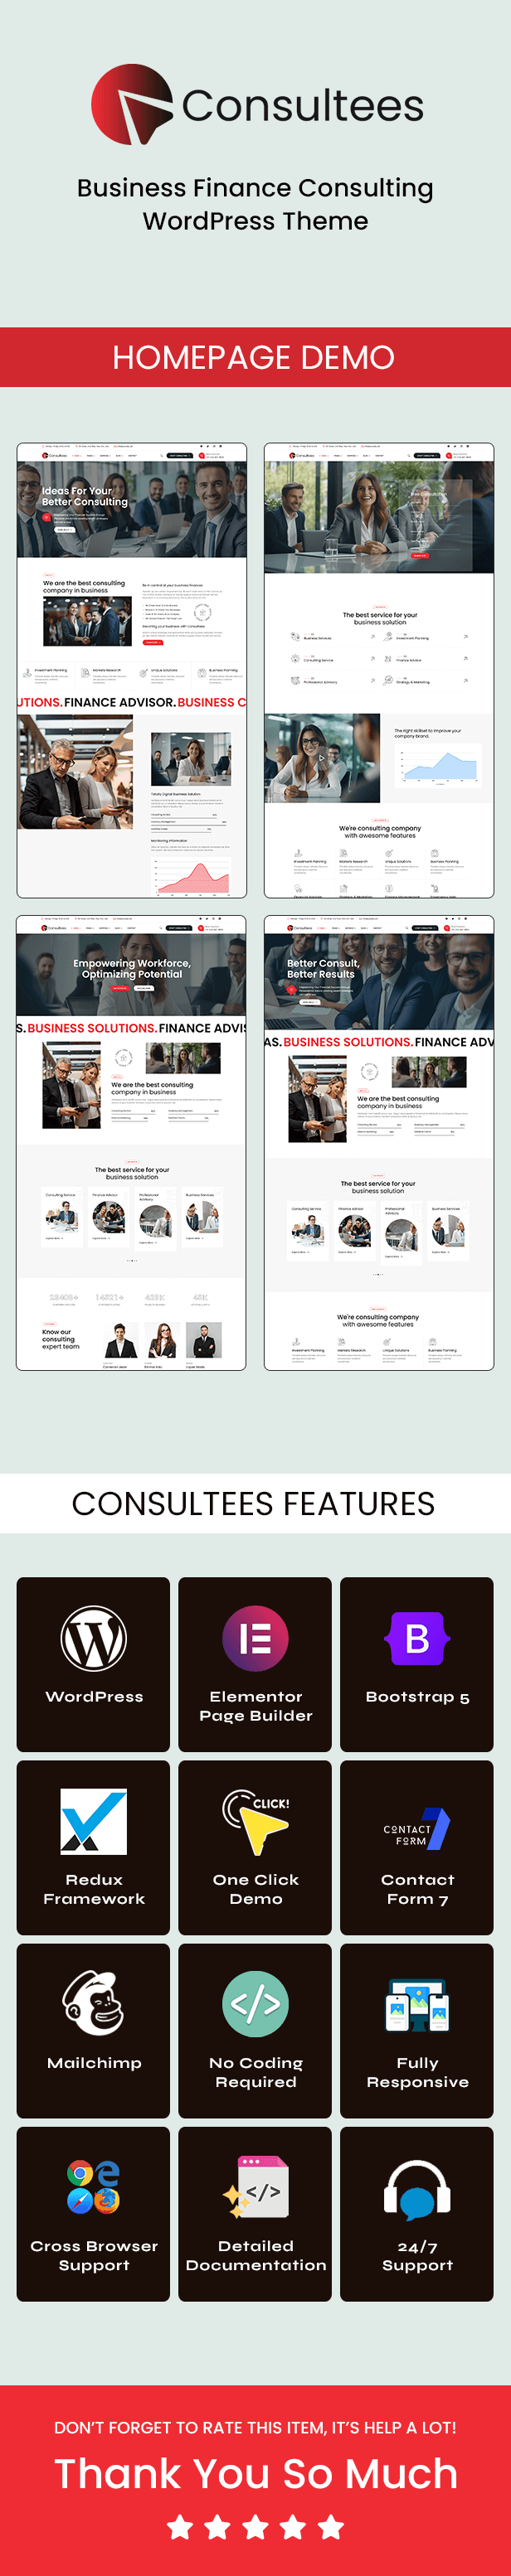 Consultees – Business Finance Consulting WordPress Theme - 2